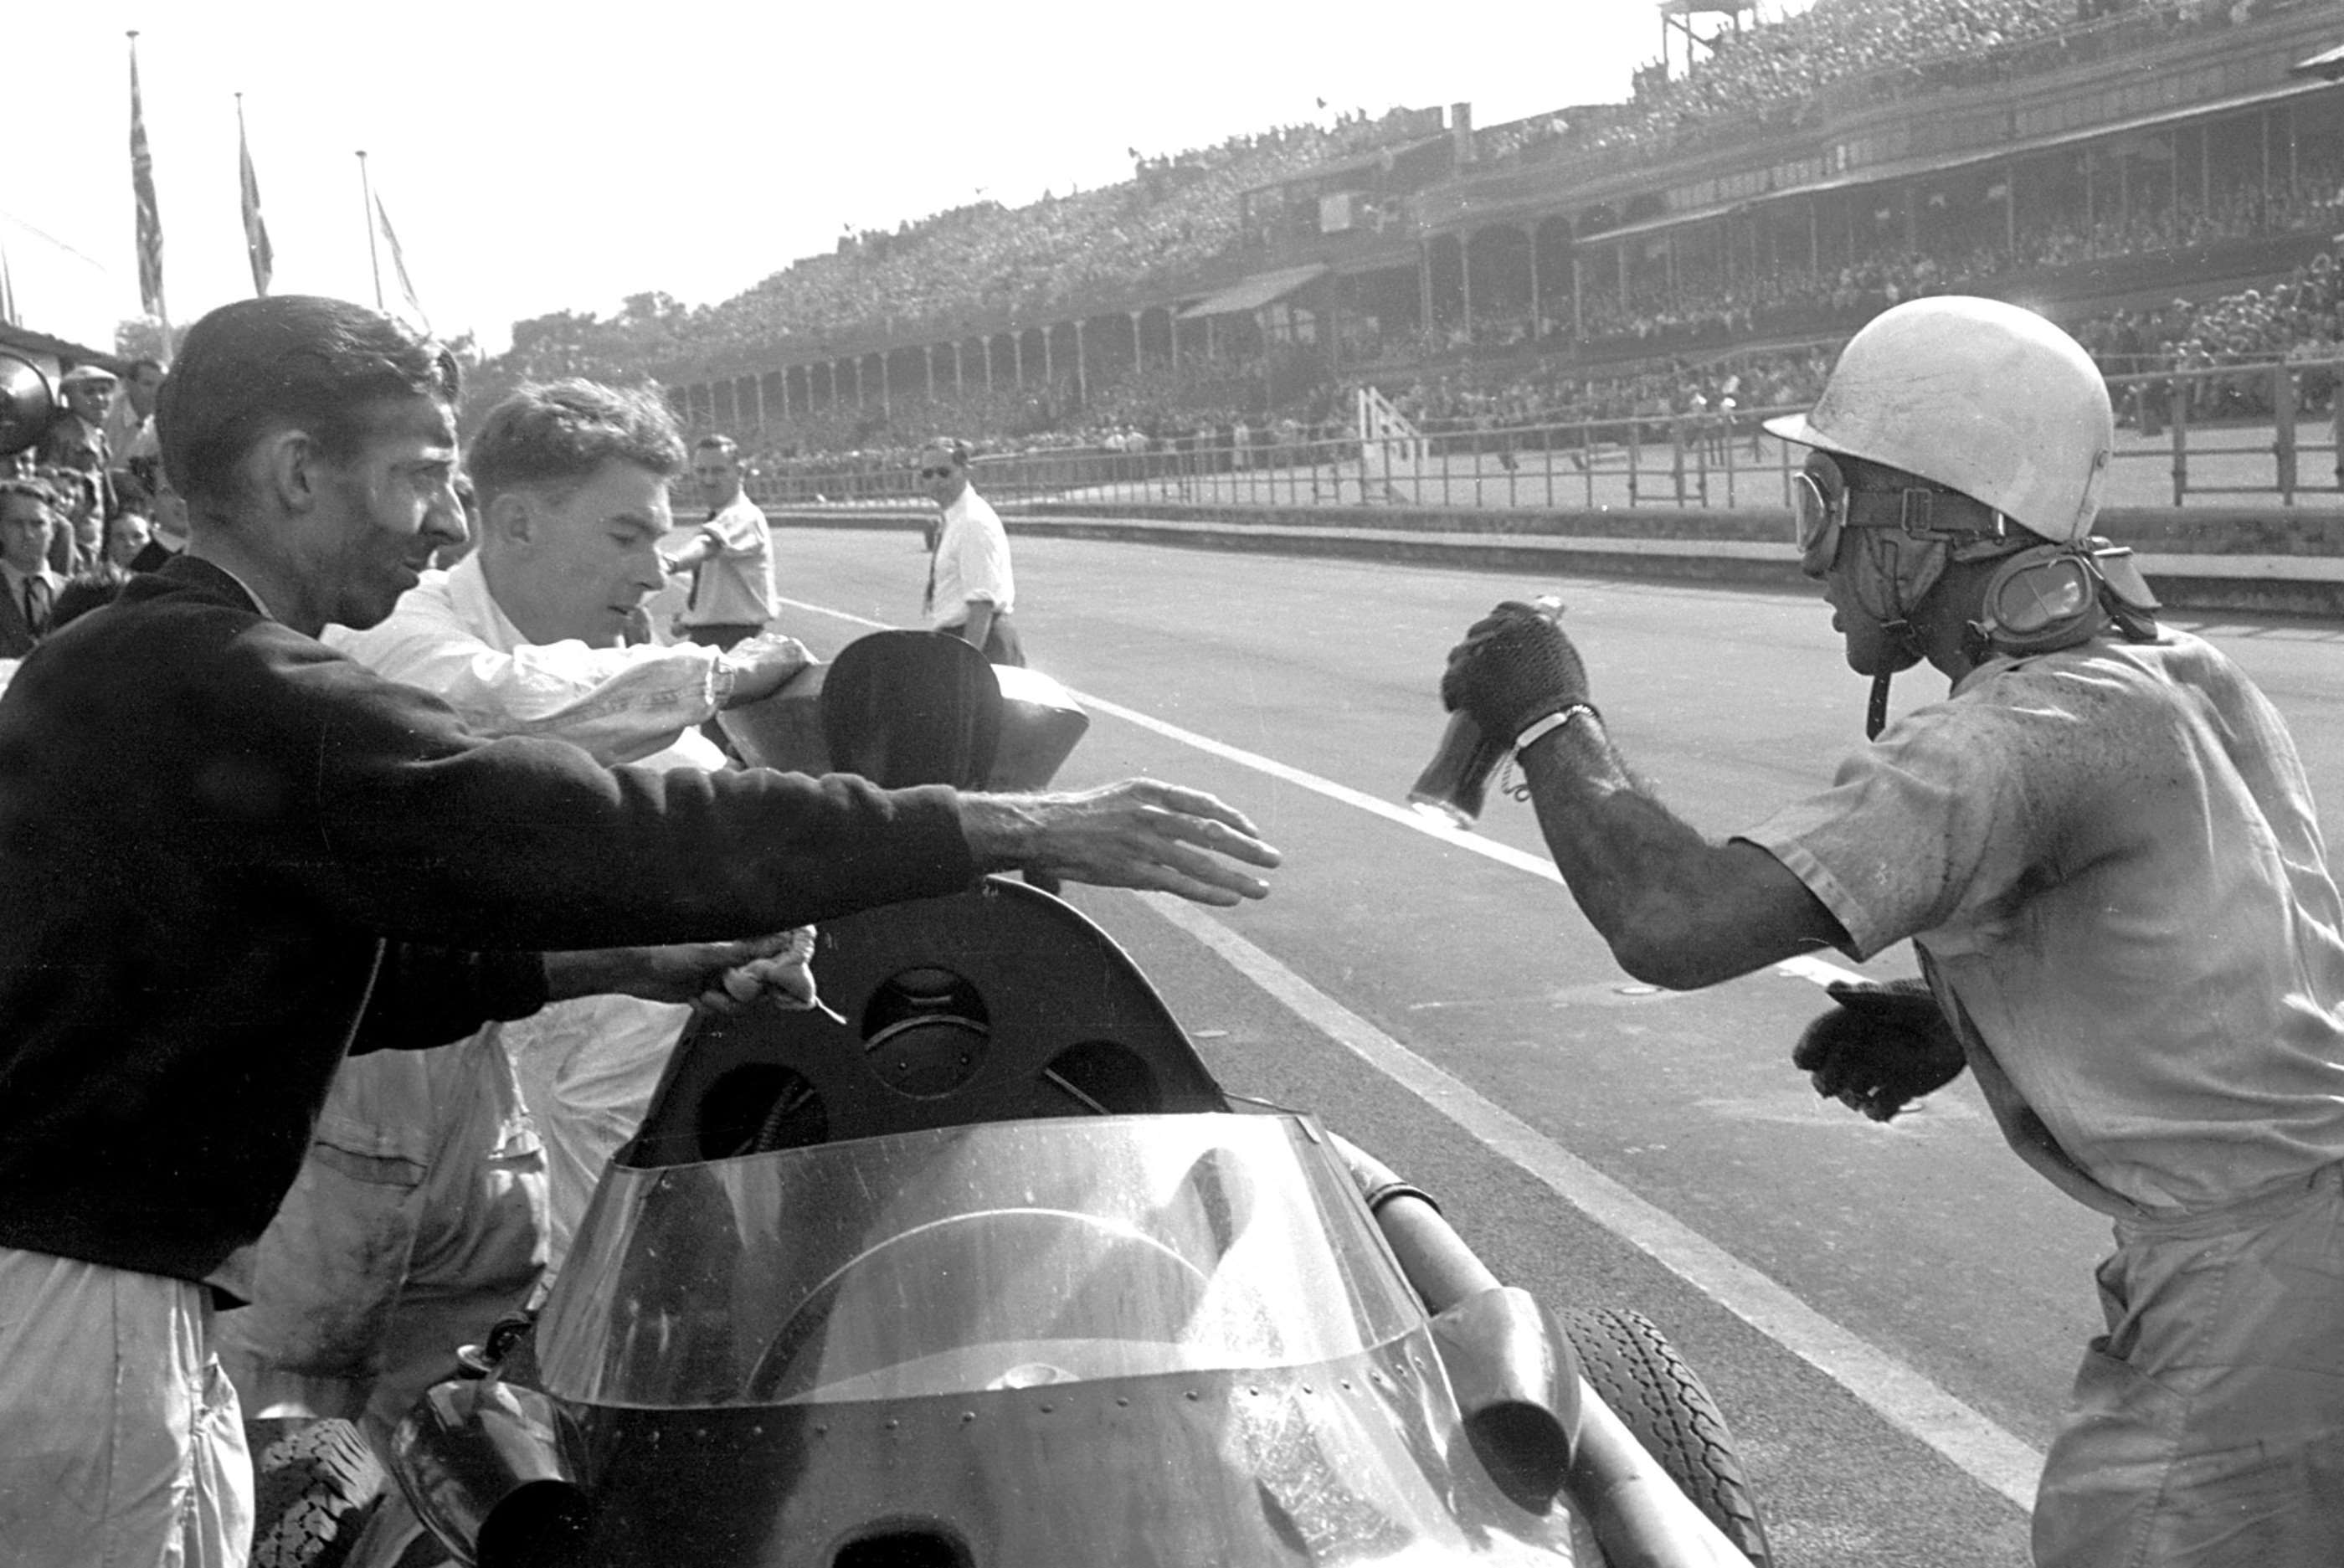 Tony Brooks hands over a drink - as well as his Vanwall car - to team-mate Stirling Moss during their crucial Vanwall pit stop at Aintree - 1957 British GP